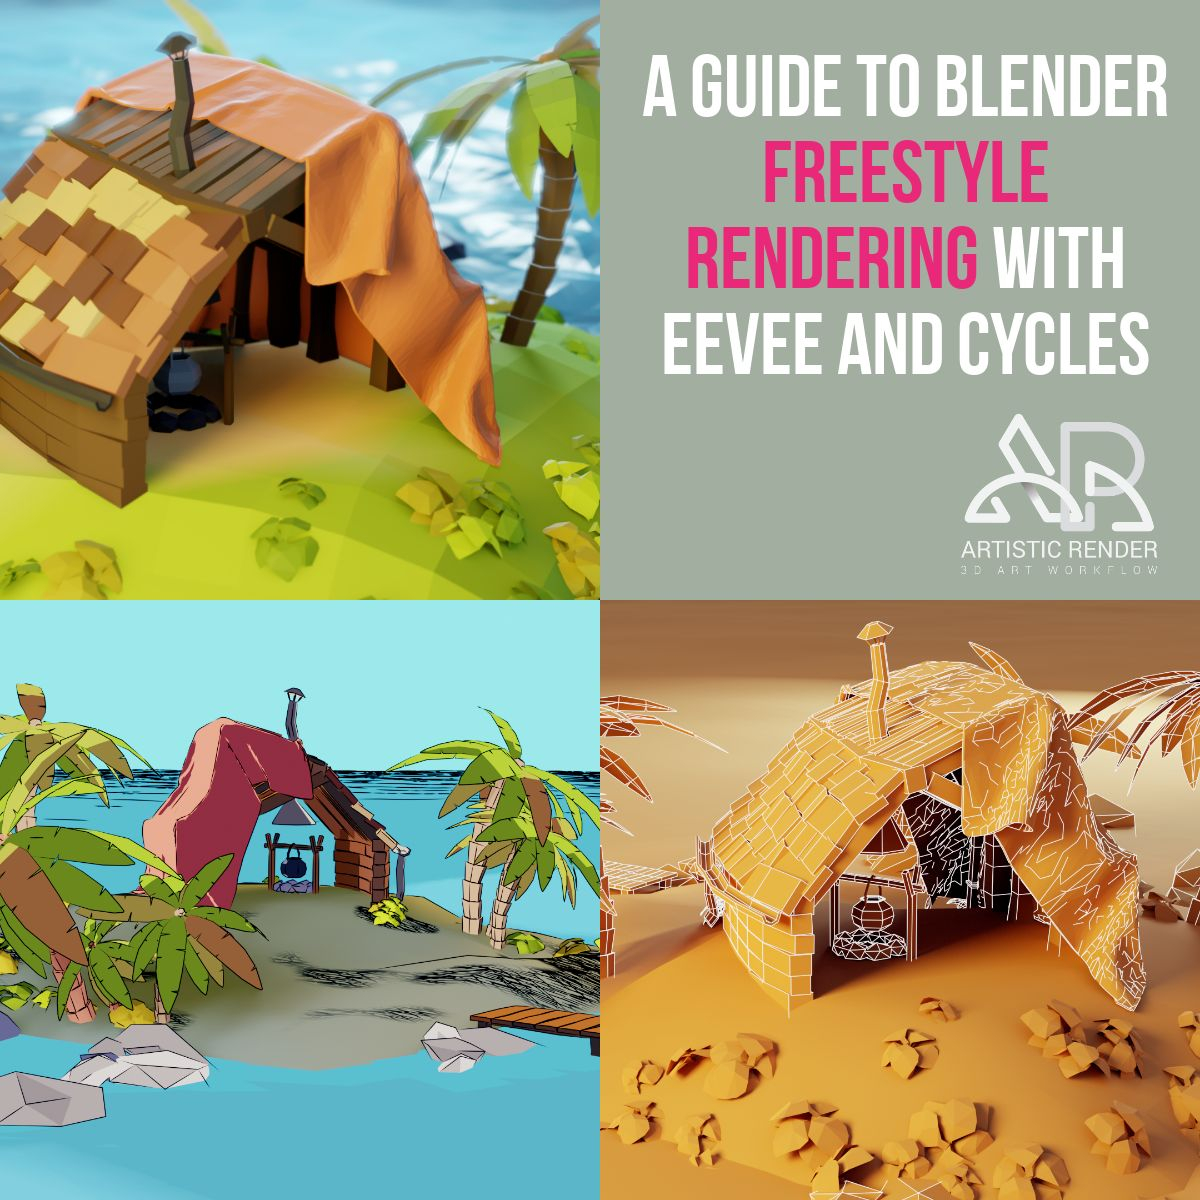 Hende selv regulere Mand A guide to Blender freestyle rendering with Eevee and Cycles -  Artisticrender.com